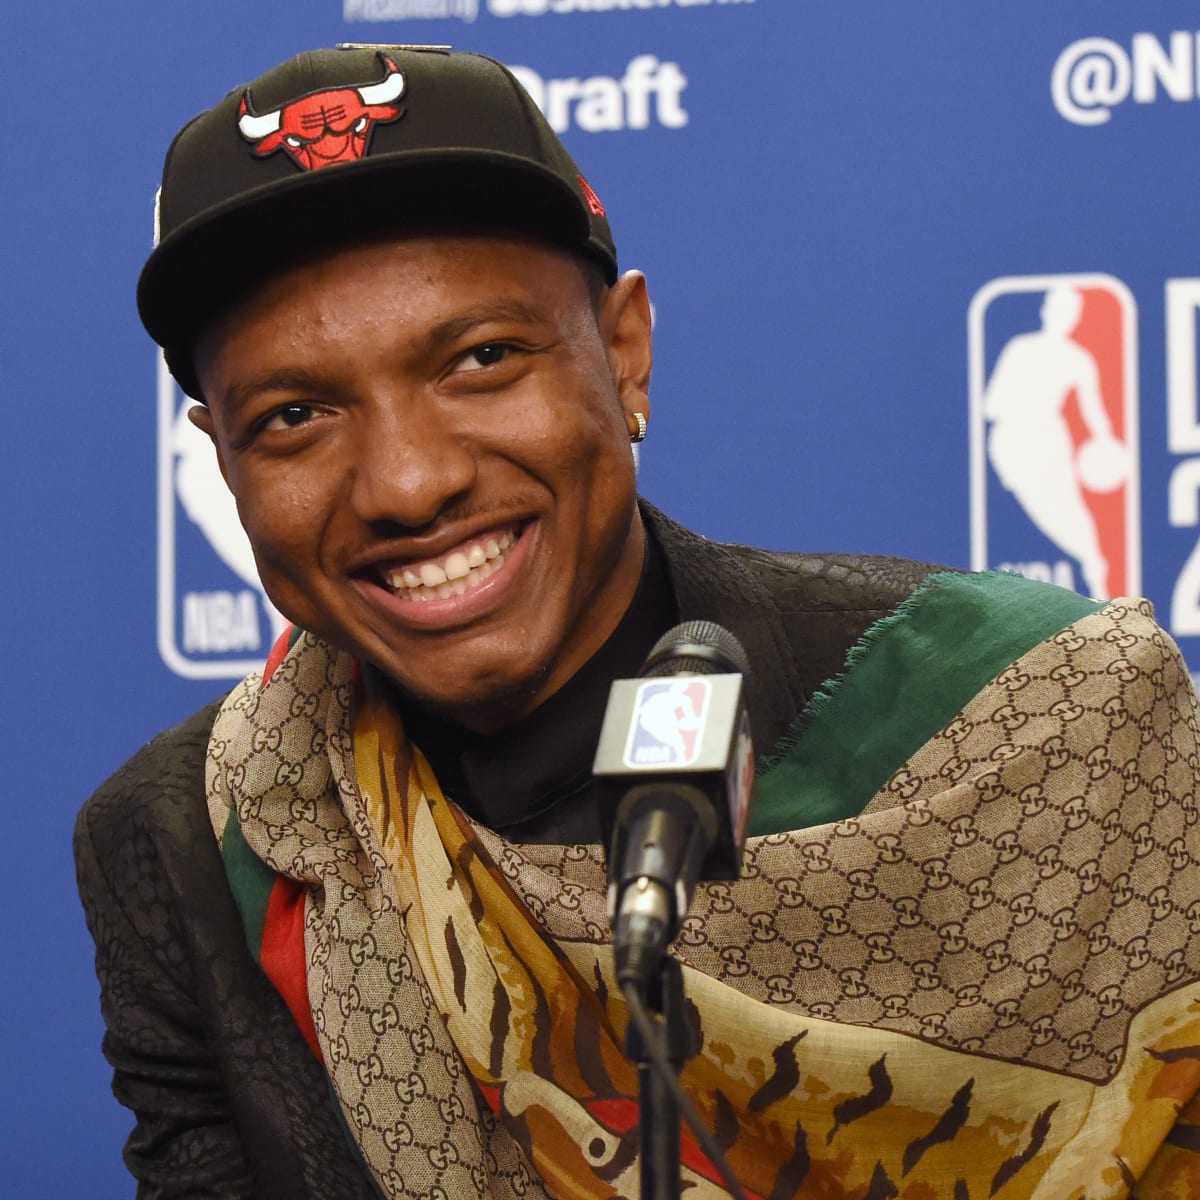 Bulls select Wendell Carter Jr. with No. 7 pick